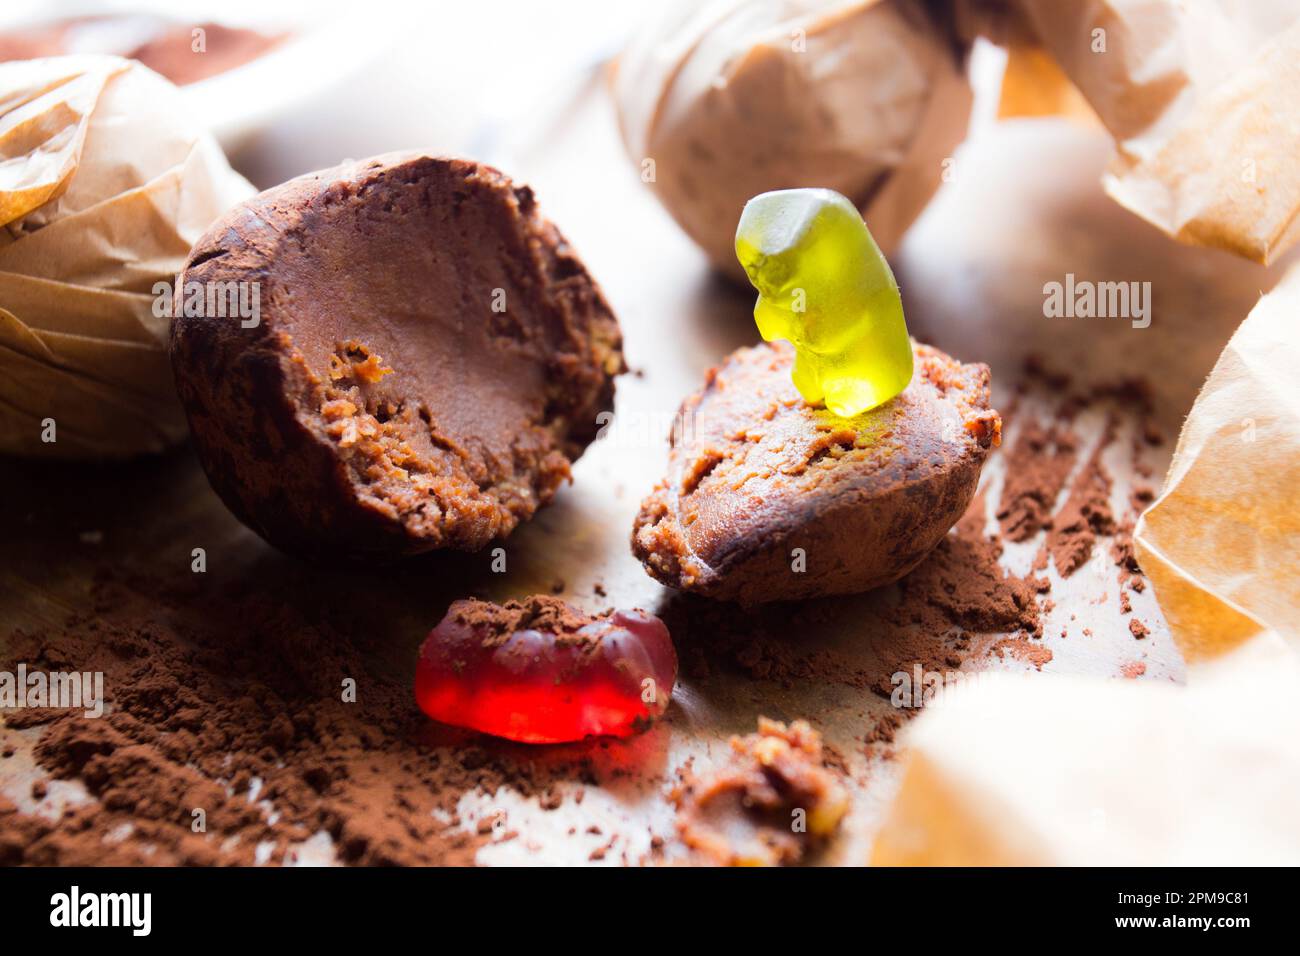 Gummy bears playing on a food table with a chocolate ball. Stock Photo